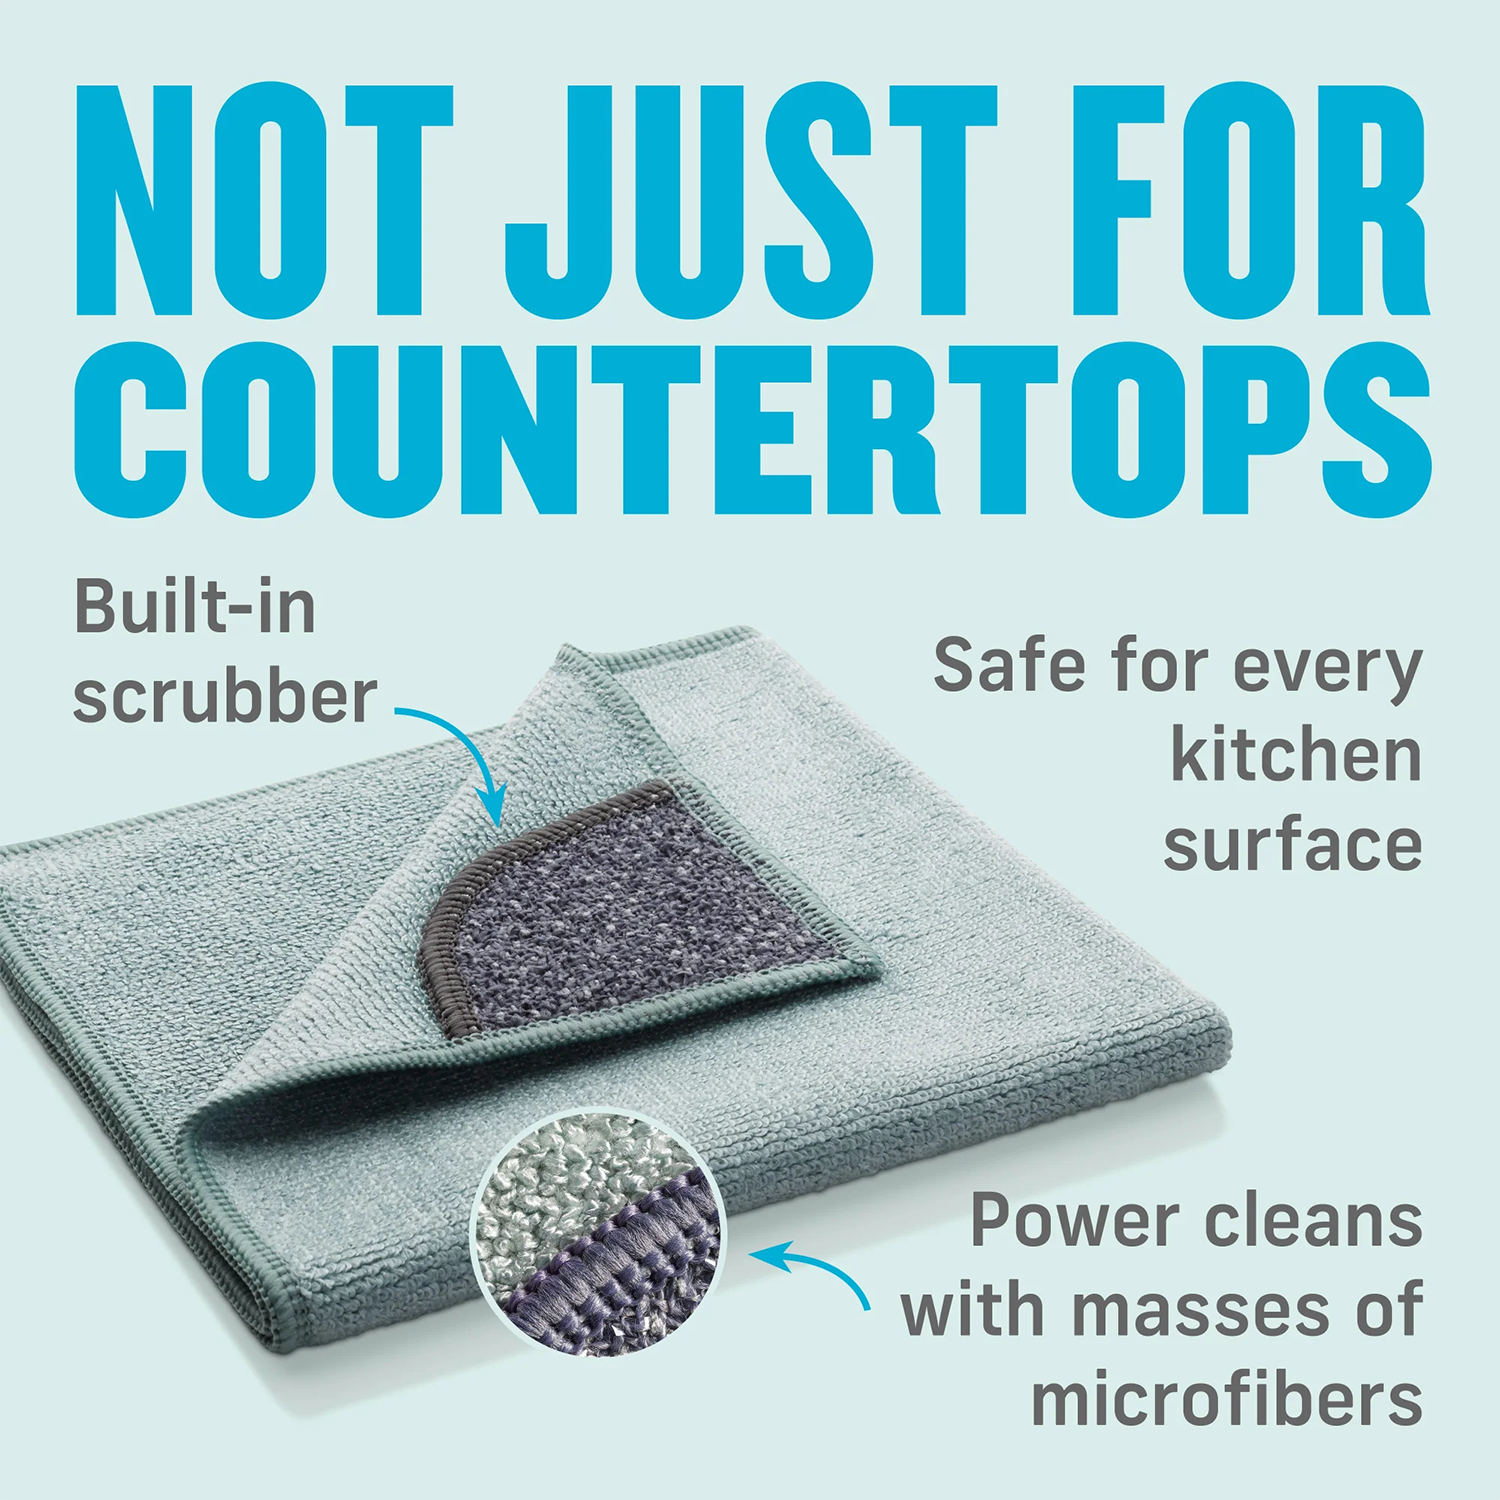 Kitchen Eco Cleaning Cloth